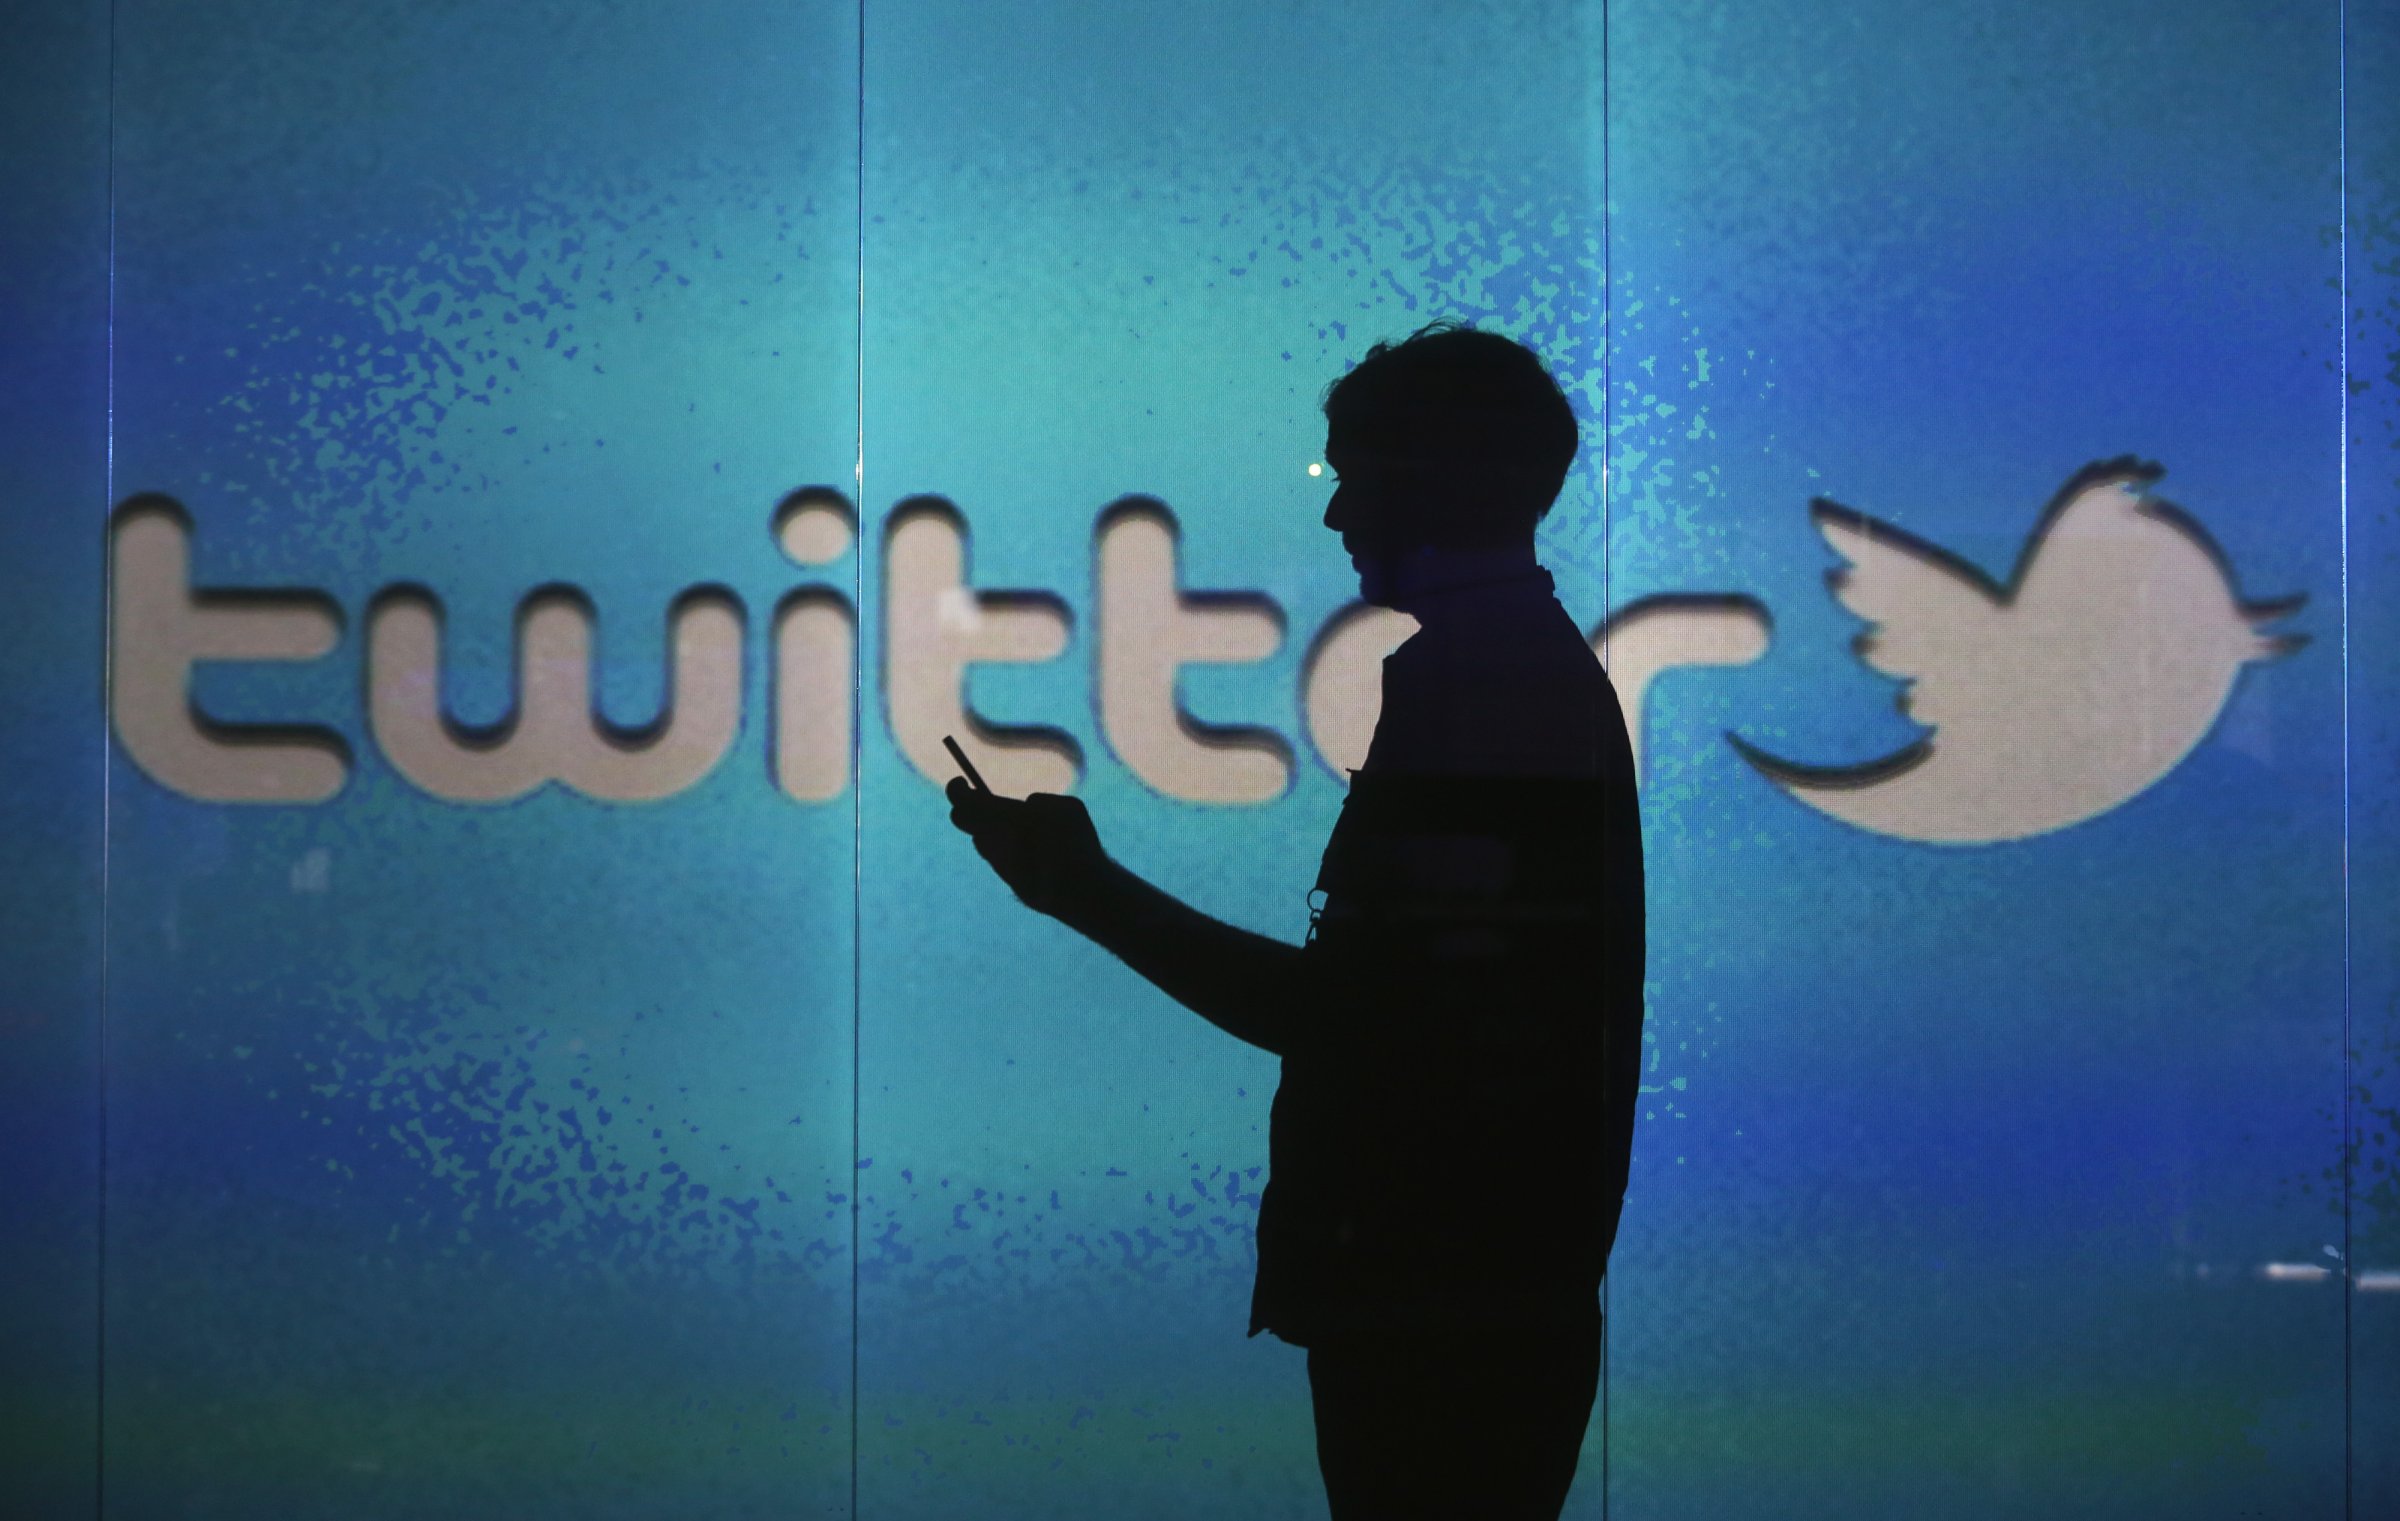 Twitter Prices At $23-25 Per Share Ahead Of IPO